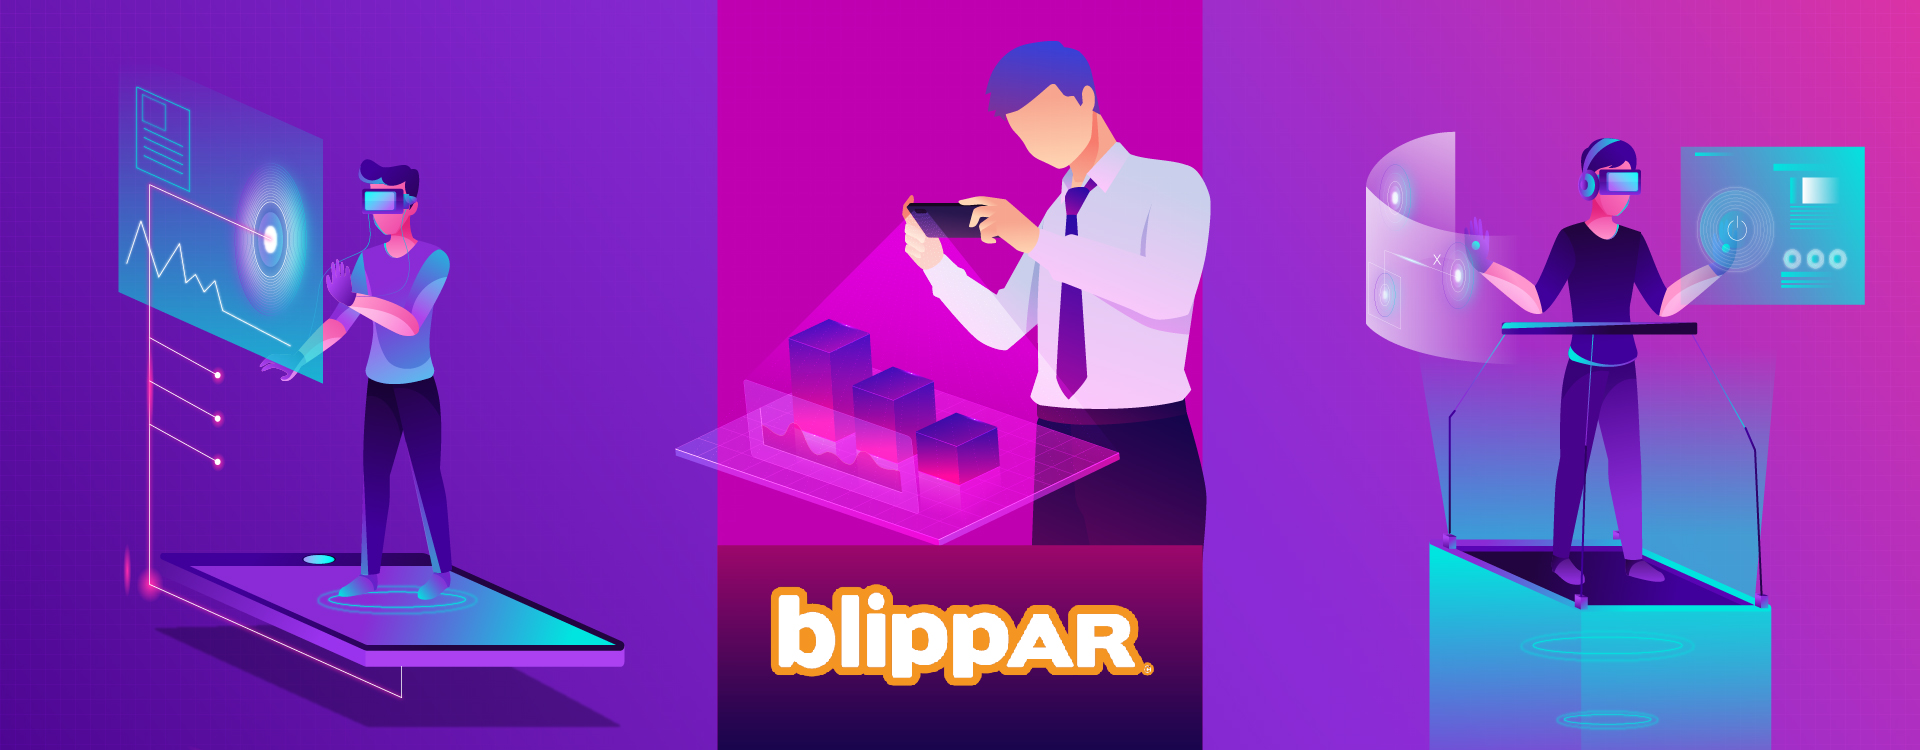 Blippar is platform for creators to create find augmented reality content